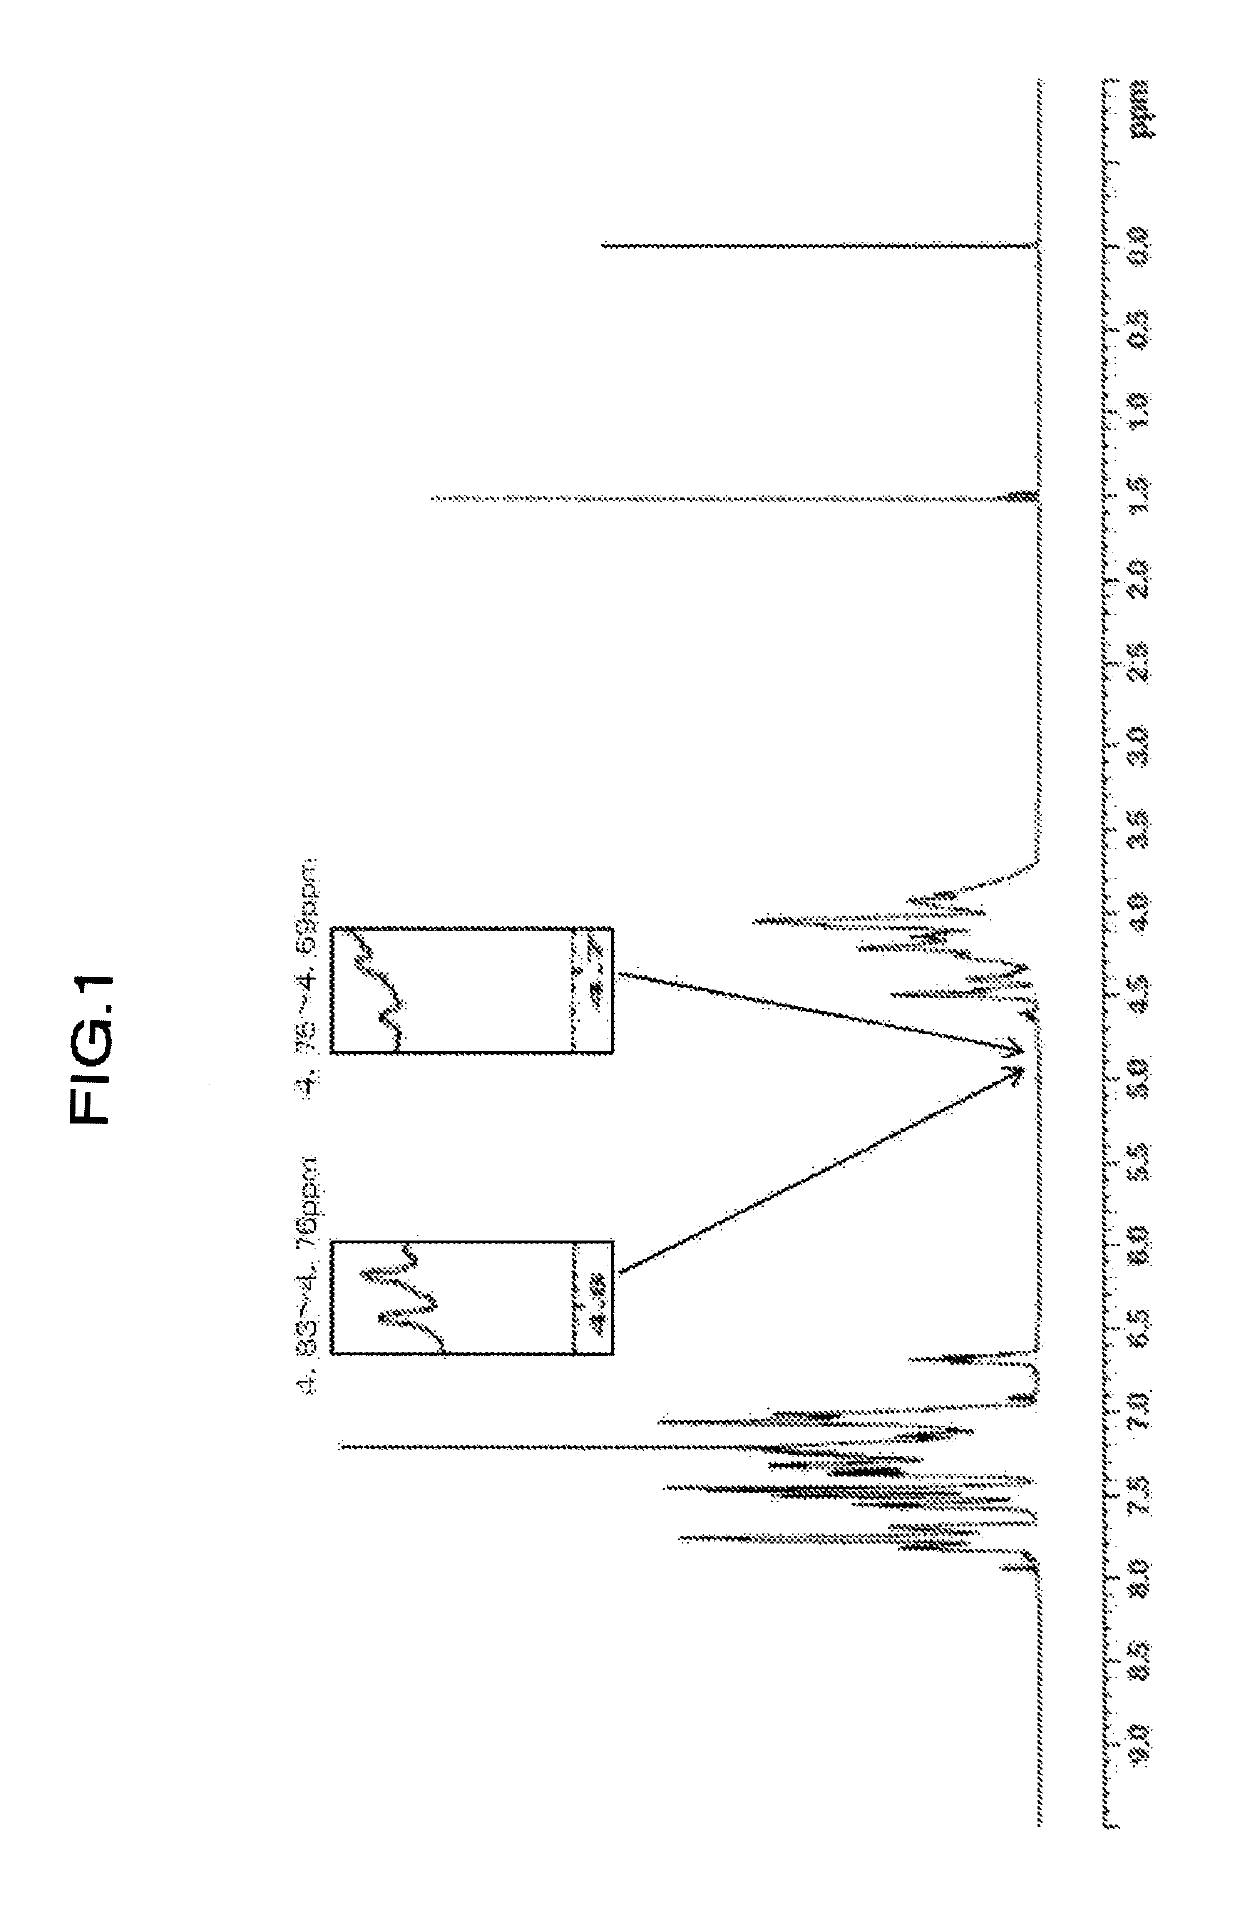 Polycarbonate resin, method for producing same, and optical lens